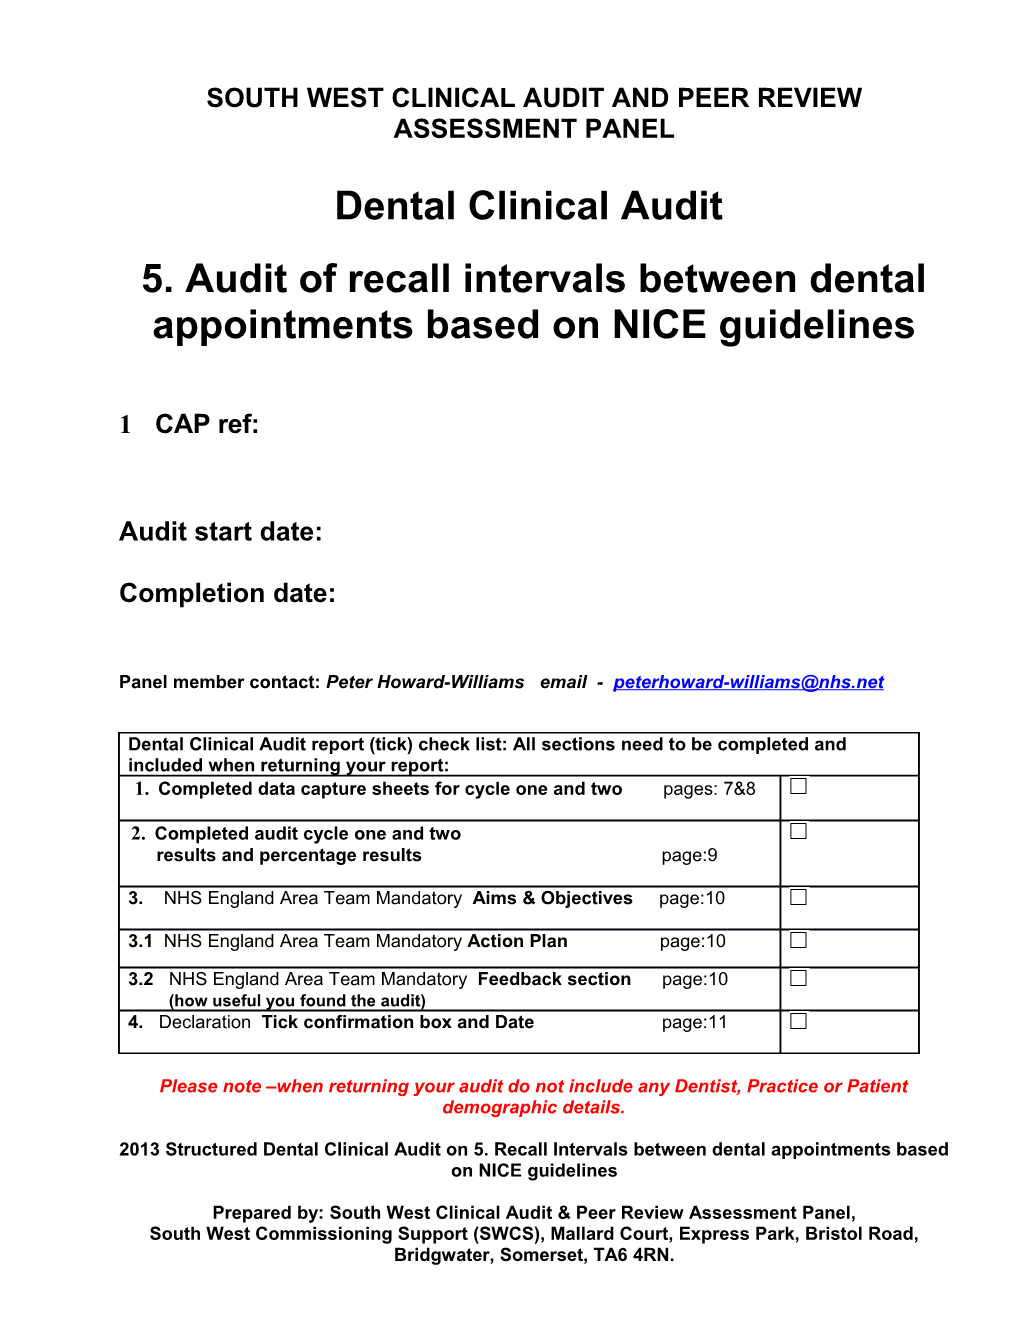 South West Clinical Audit and Peer Review Assessment Panel